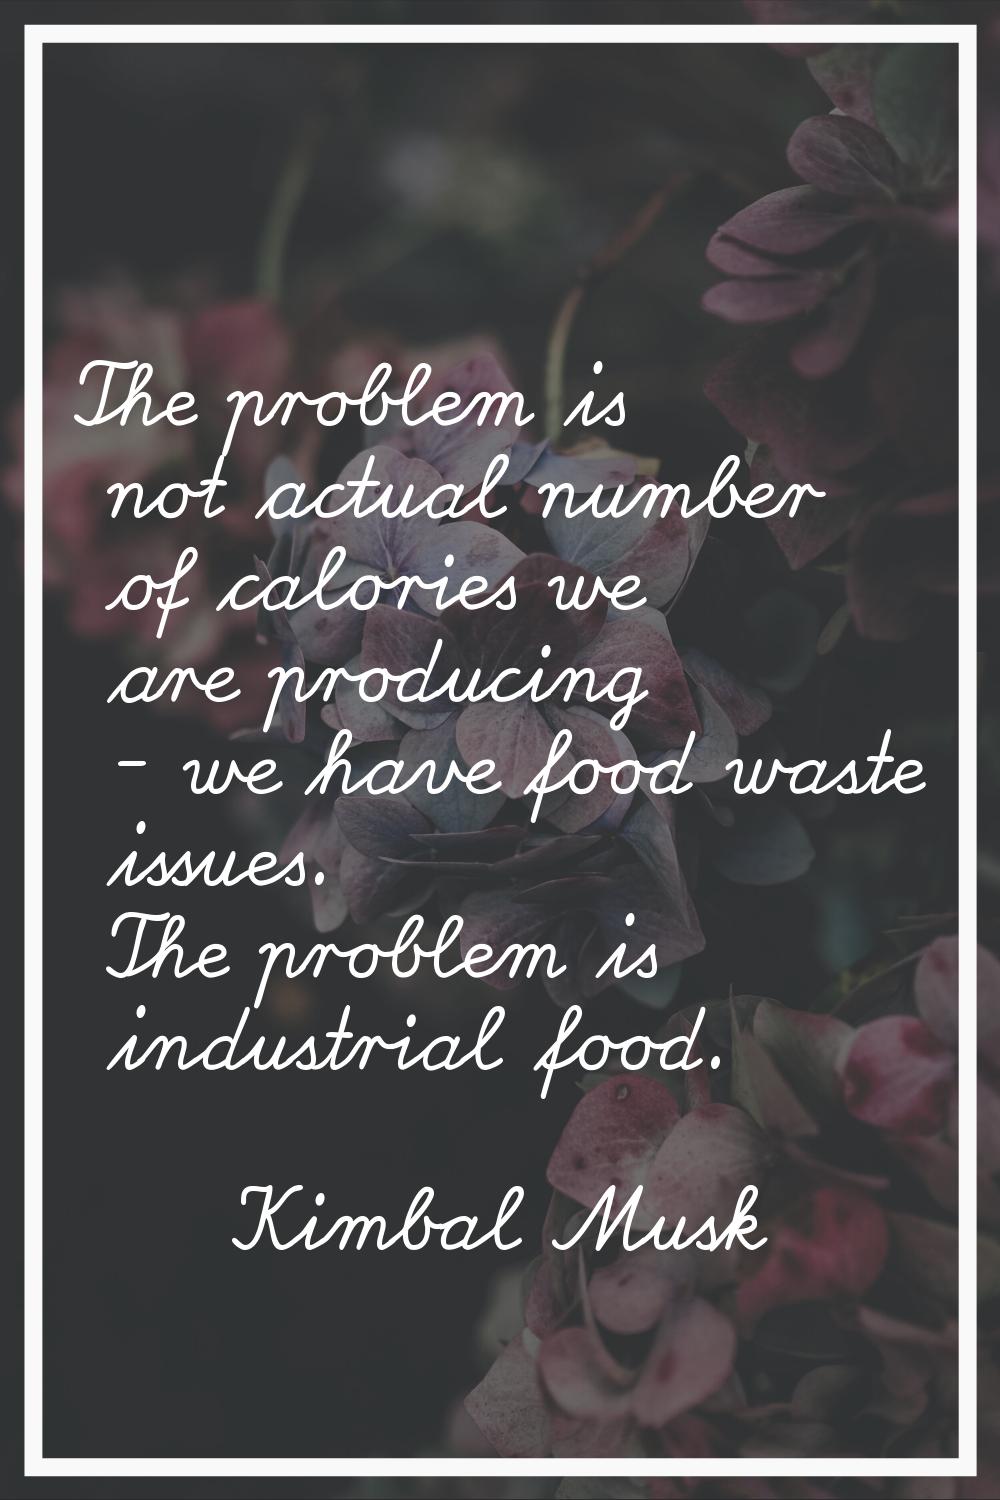 The problem is not actual number of calories we are producing - we have food waste issues. The prob